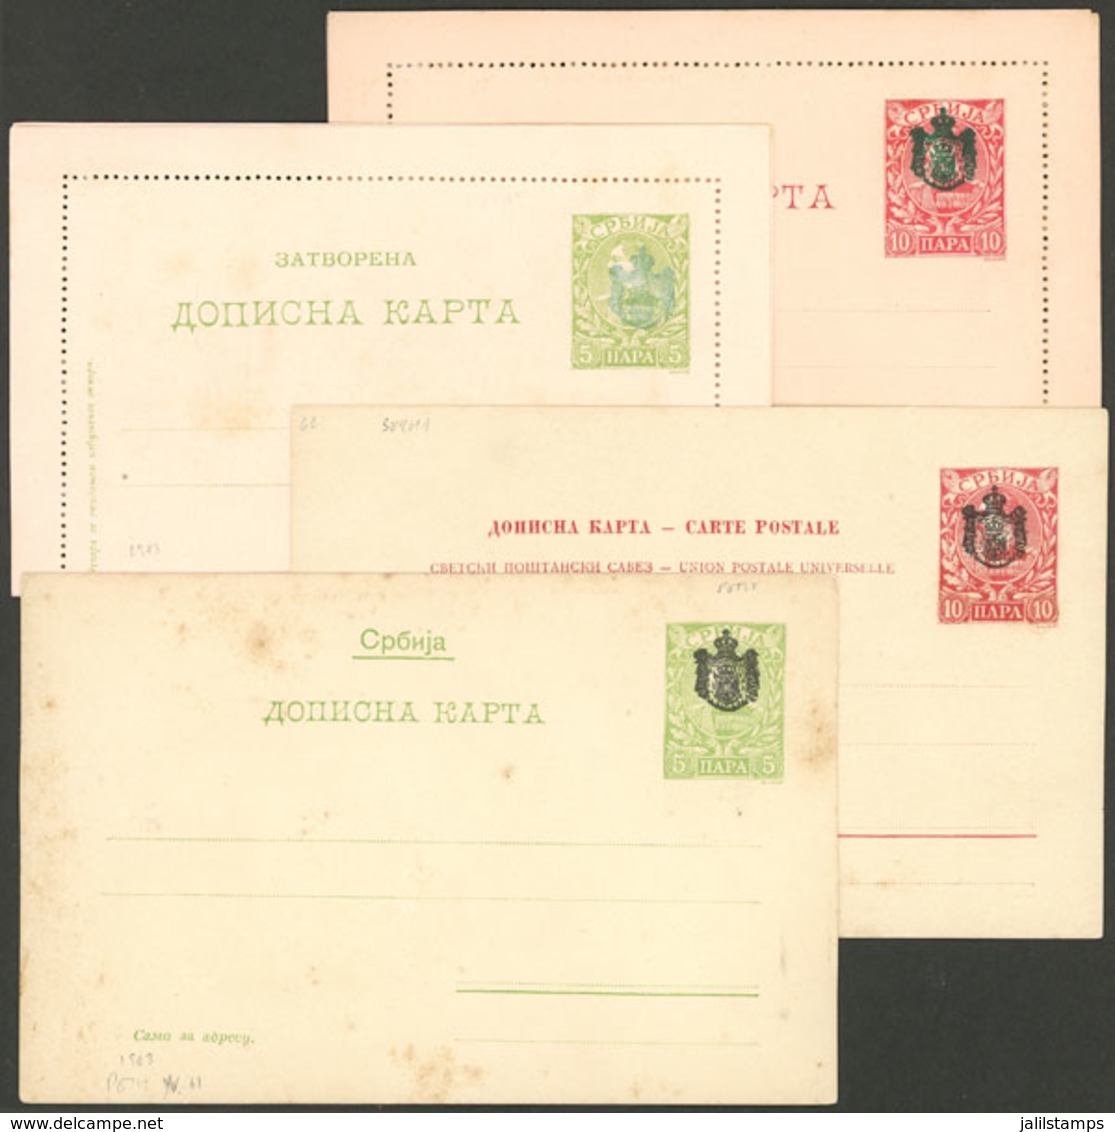 SERBIA: 4 Old Postal Stationeries Overprinted With Coat Of Arms, Interesting! - Serbia